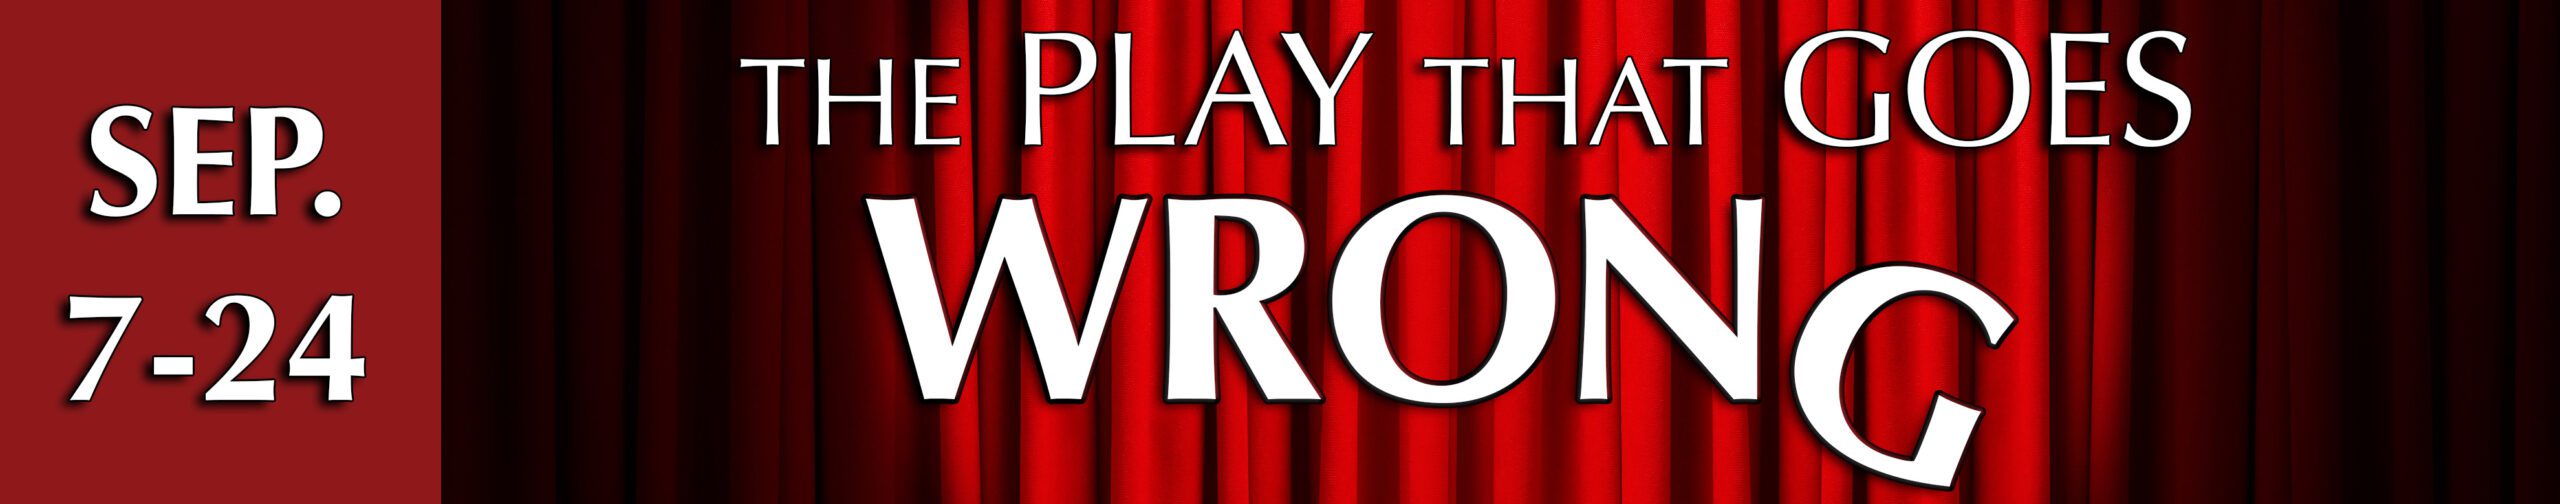 A red theatre curtain with a single spotlight highlighting the words "The Play That Goes Wrong", on stage at CFRT September 7-24, 2023.